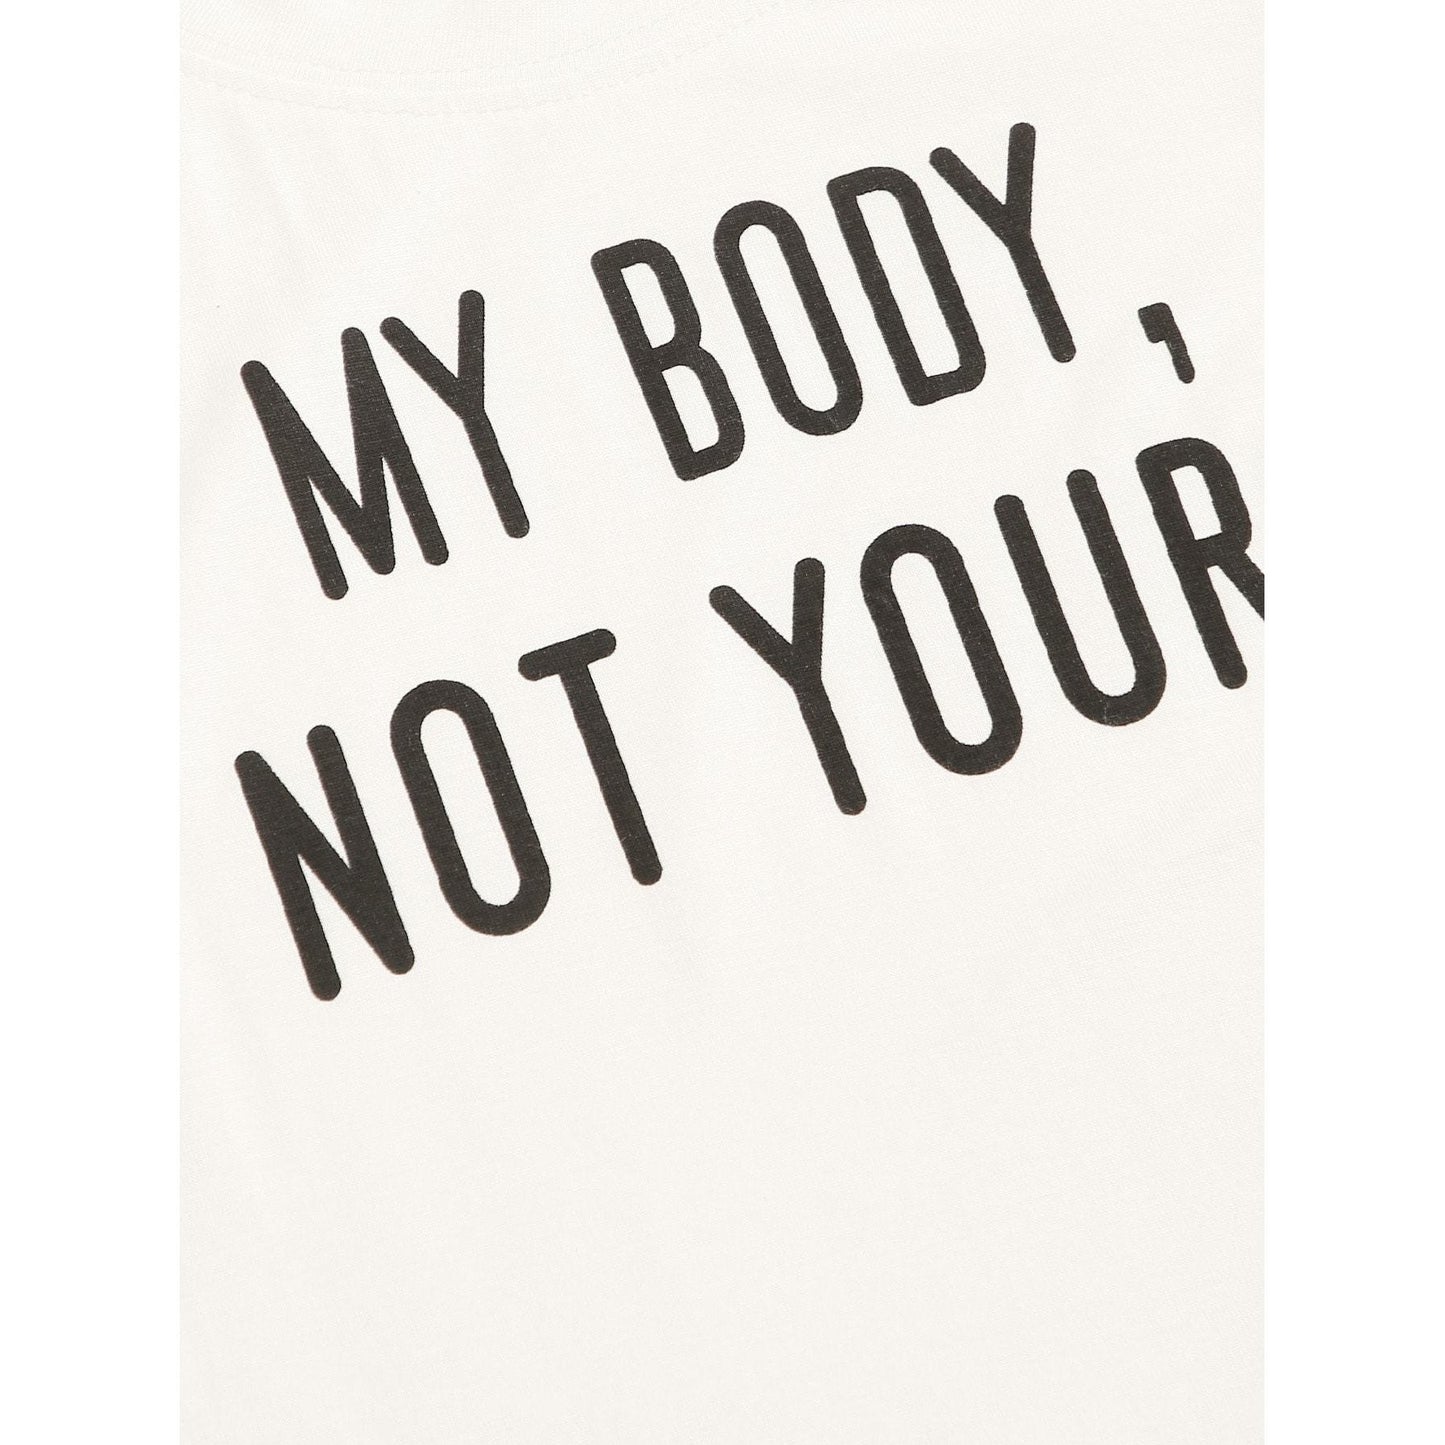 My Body, Not Yours